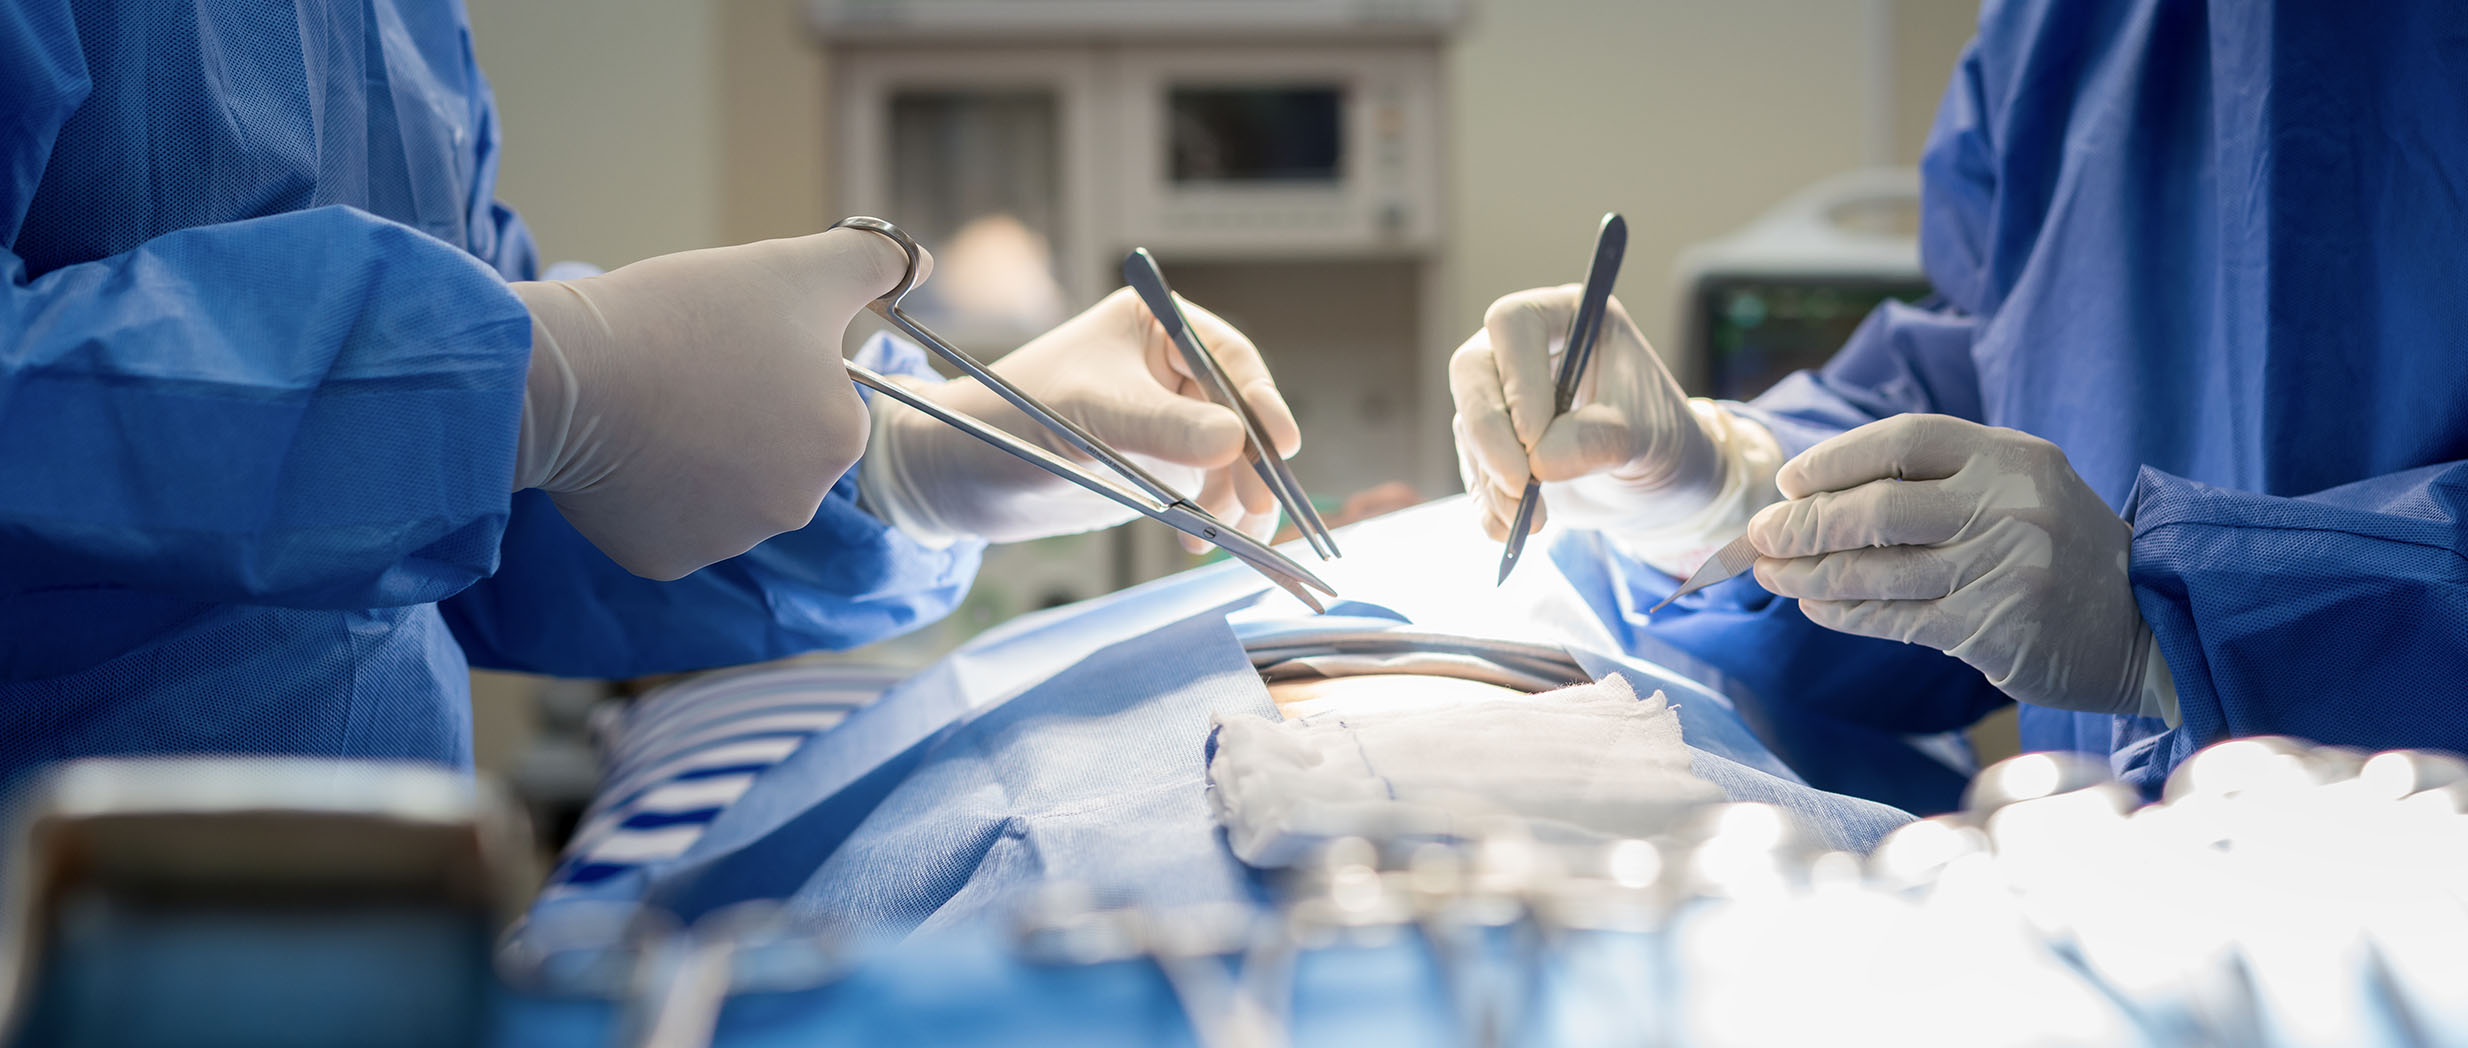 Doctor performs surgery on patient in operating room.